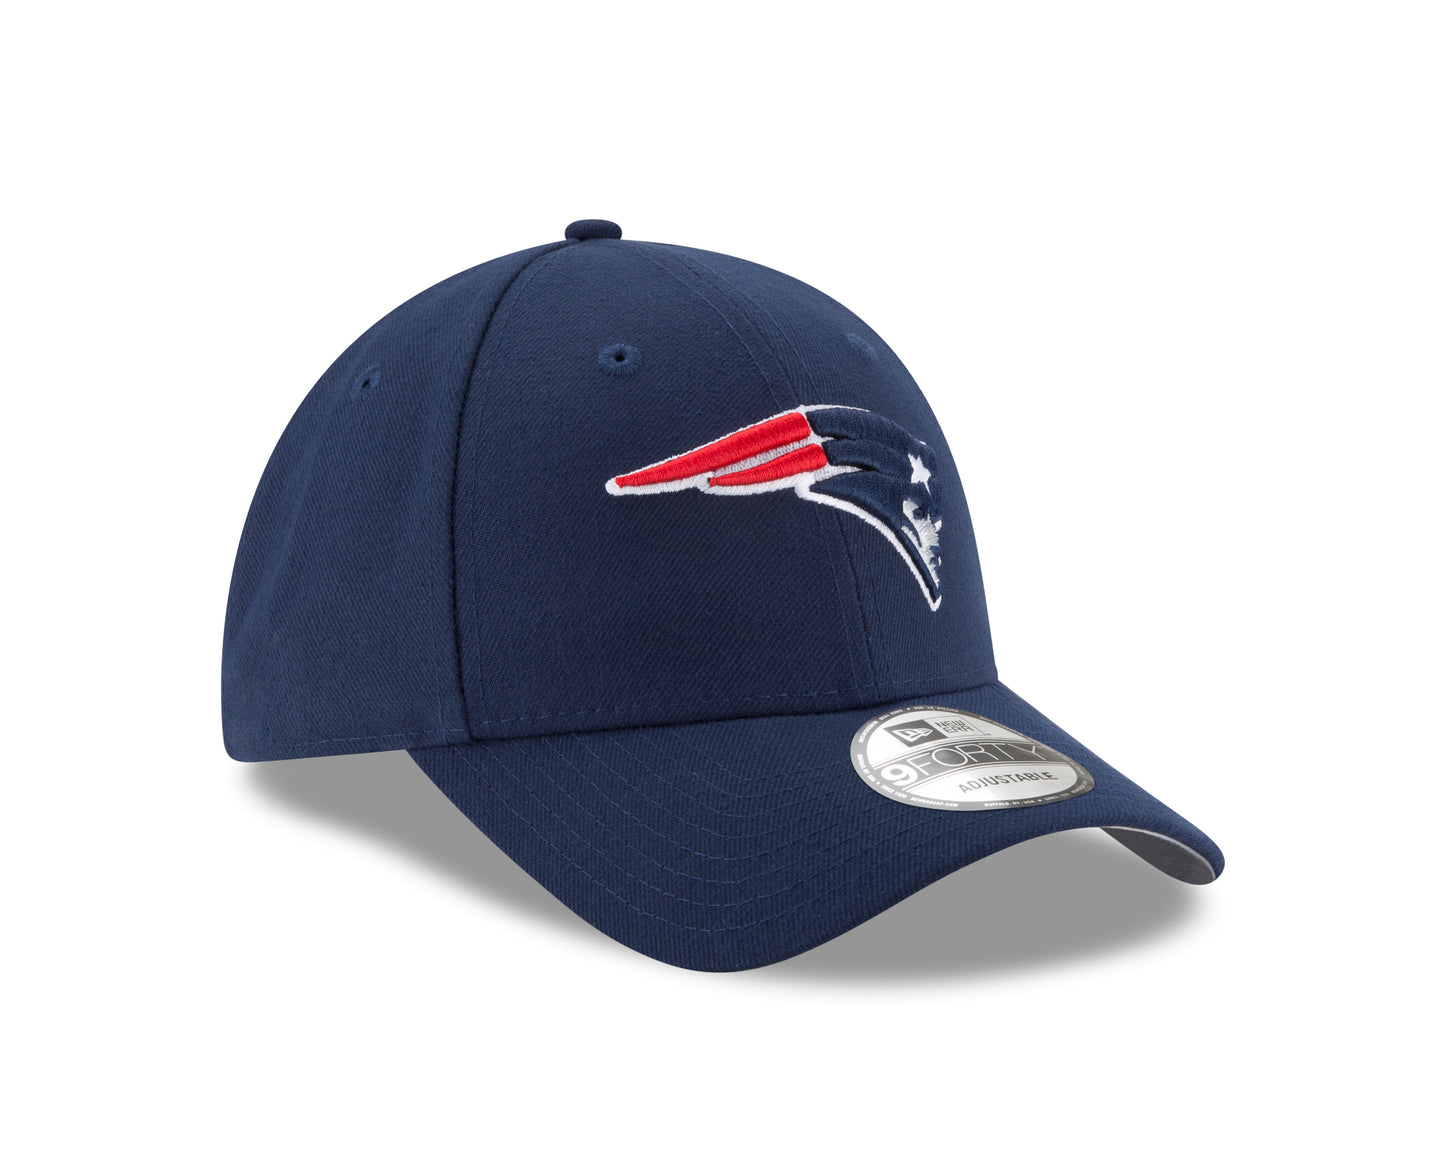 New England Patriots The League 9Forty - Navy - Headz Up 